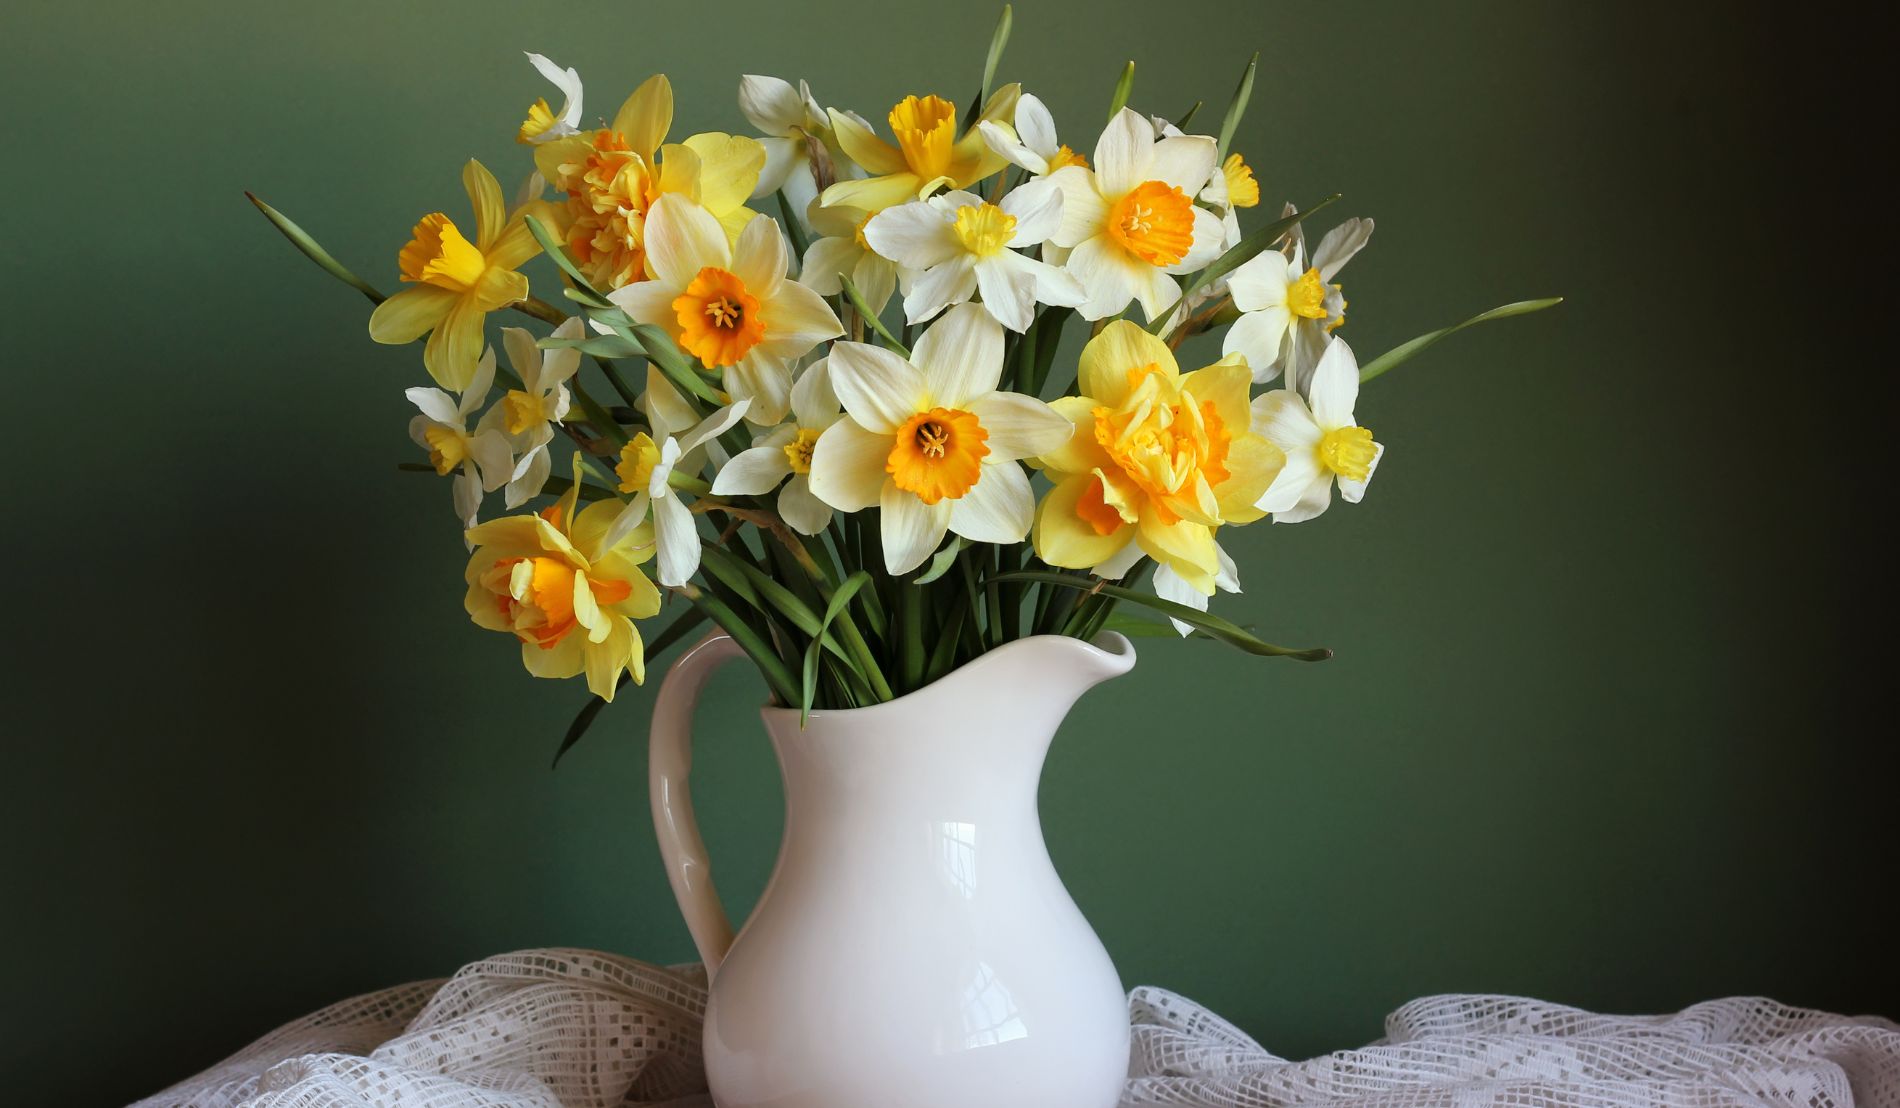 A beautiful bouquet of white, orange, and yellow daffodils in a white watering vase in front of a dark green background.